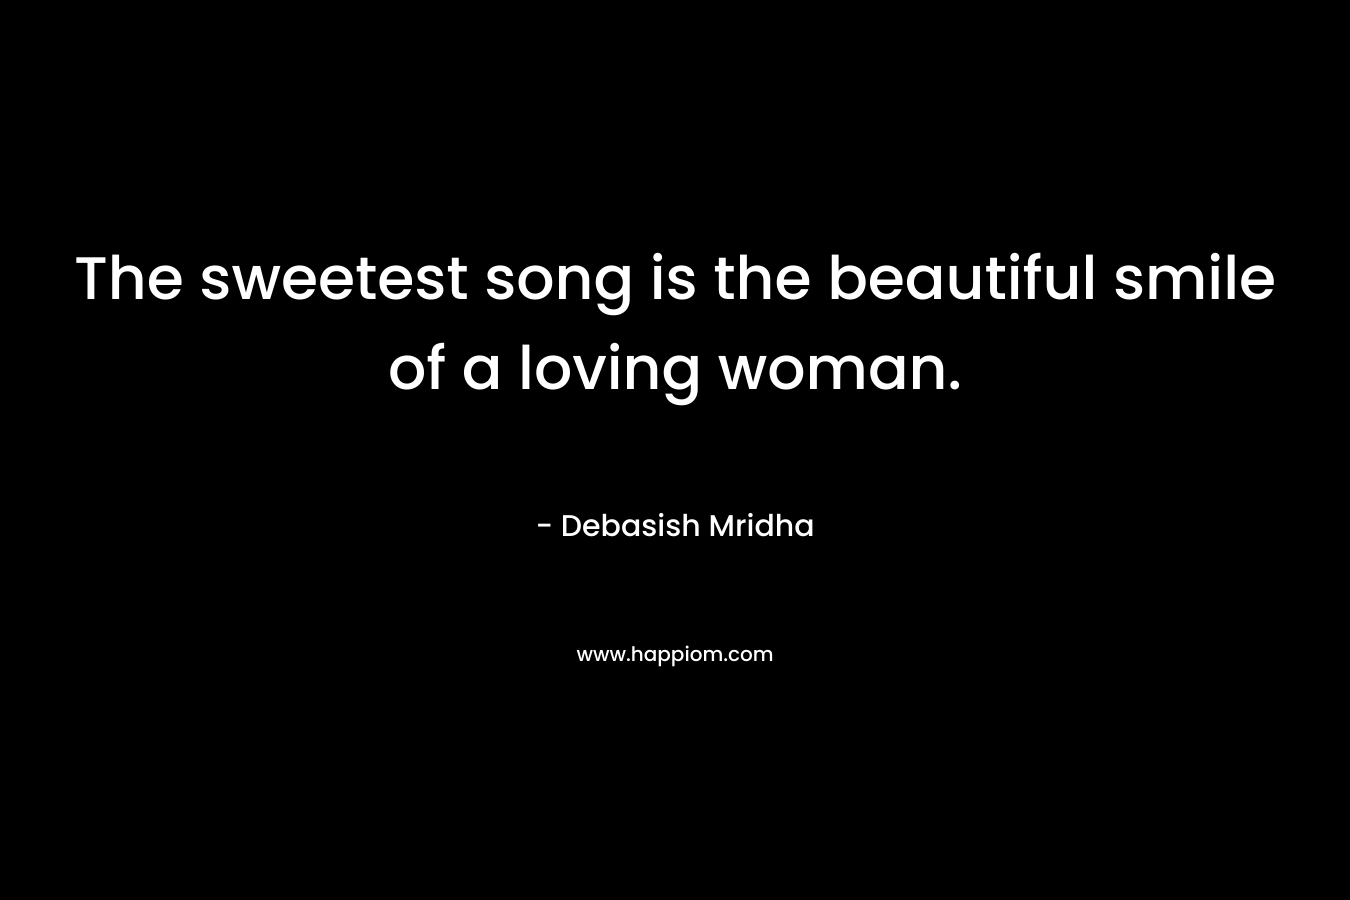 The sweetest song is the beautiful smile of a loving woman.